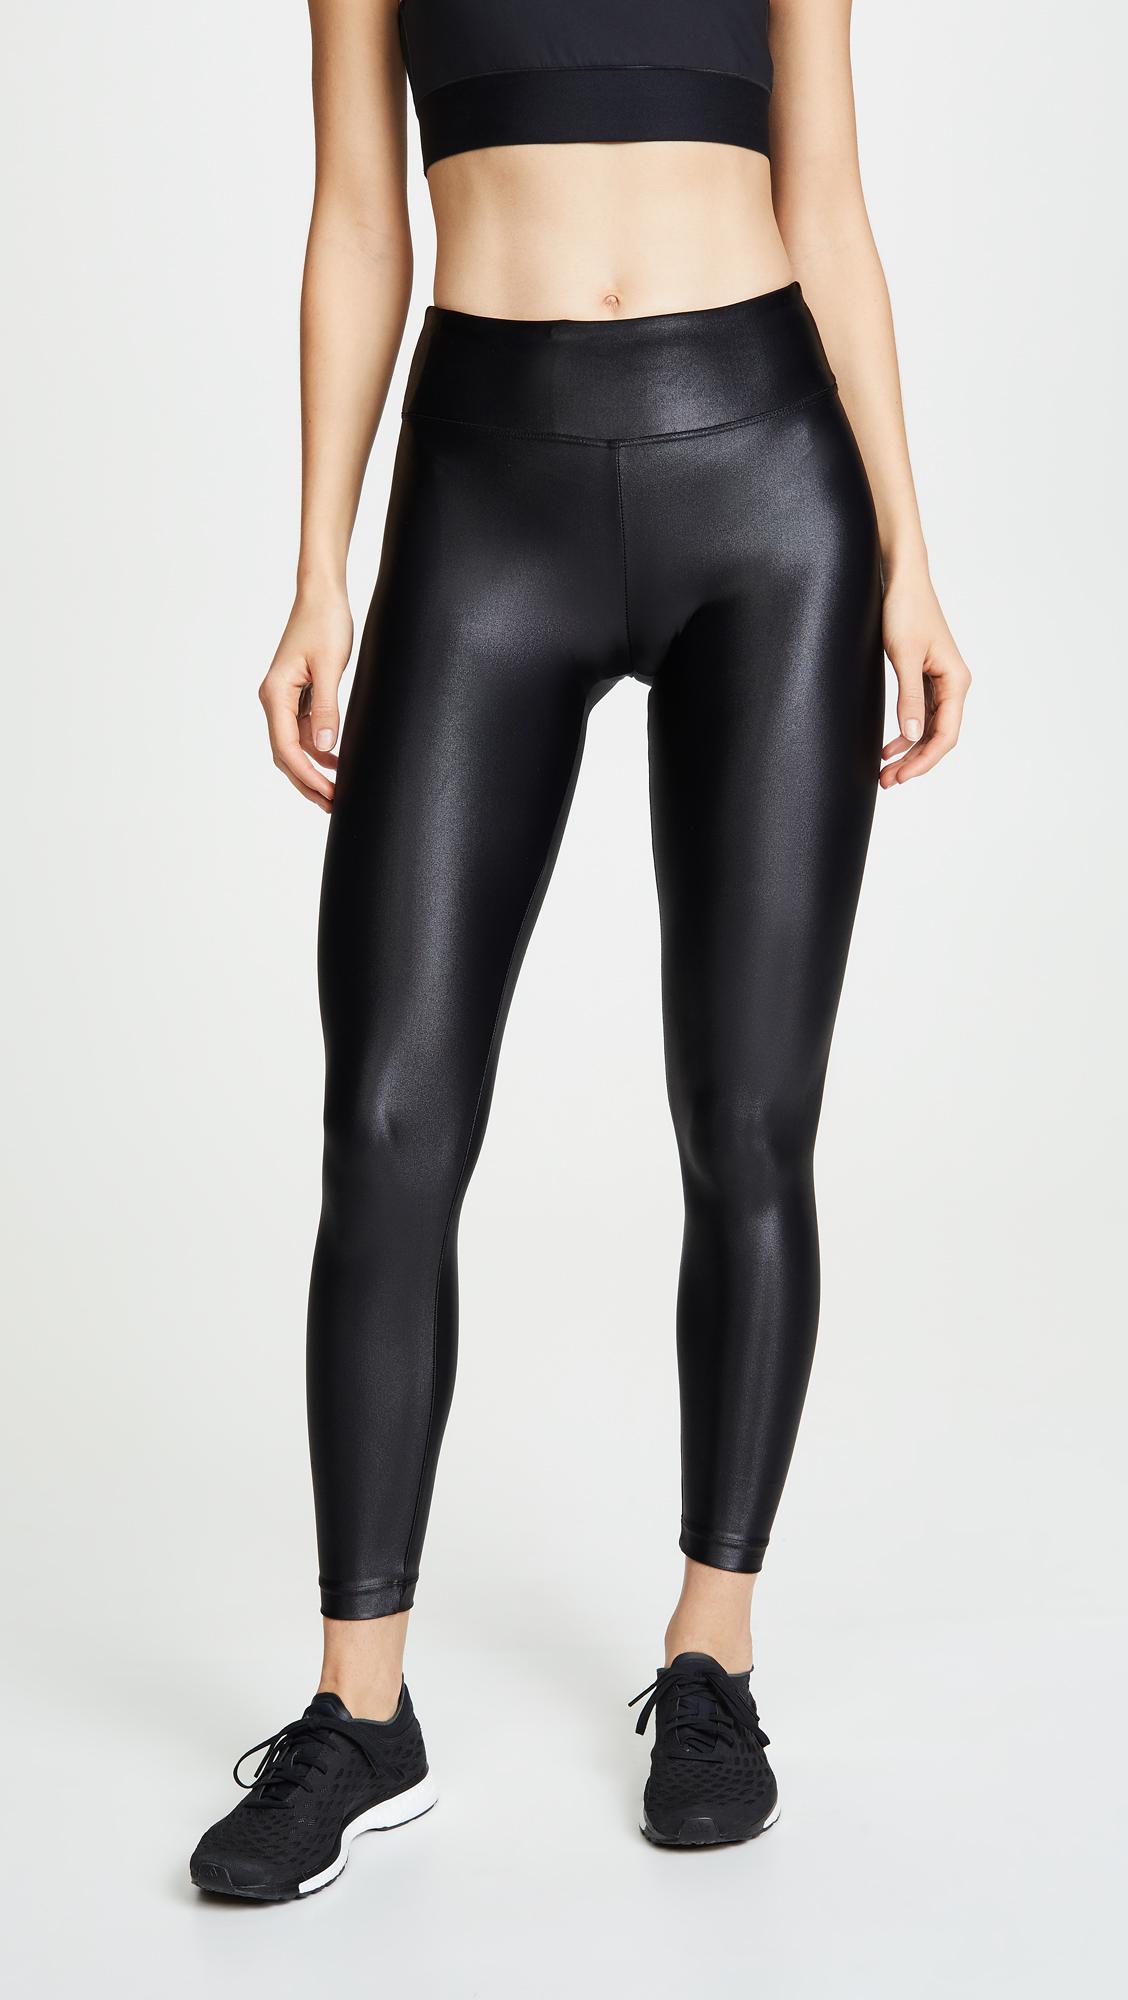 Koral Synthetic Shiny Metallic Active Legging in Black (Blue) - Save 38